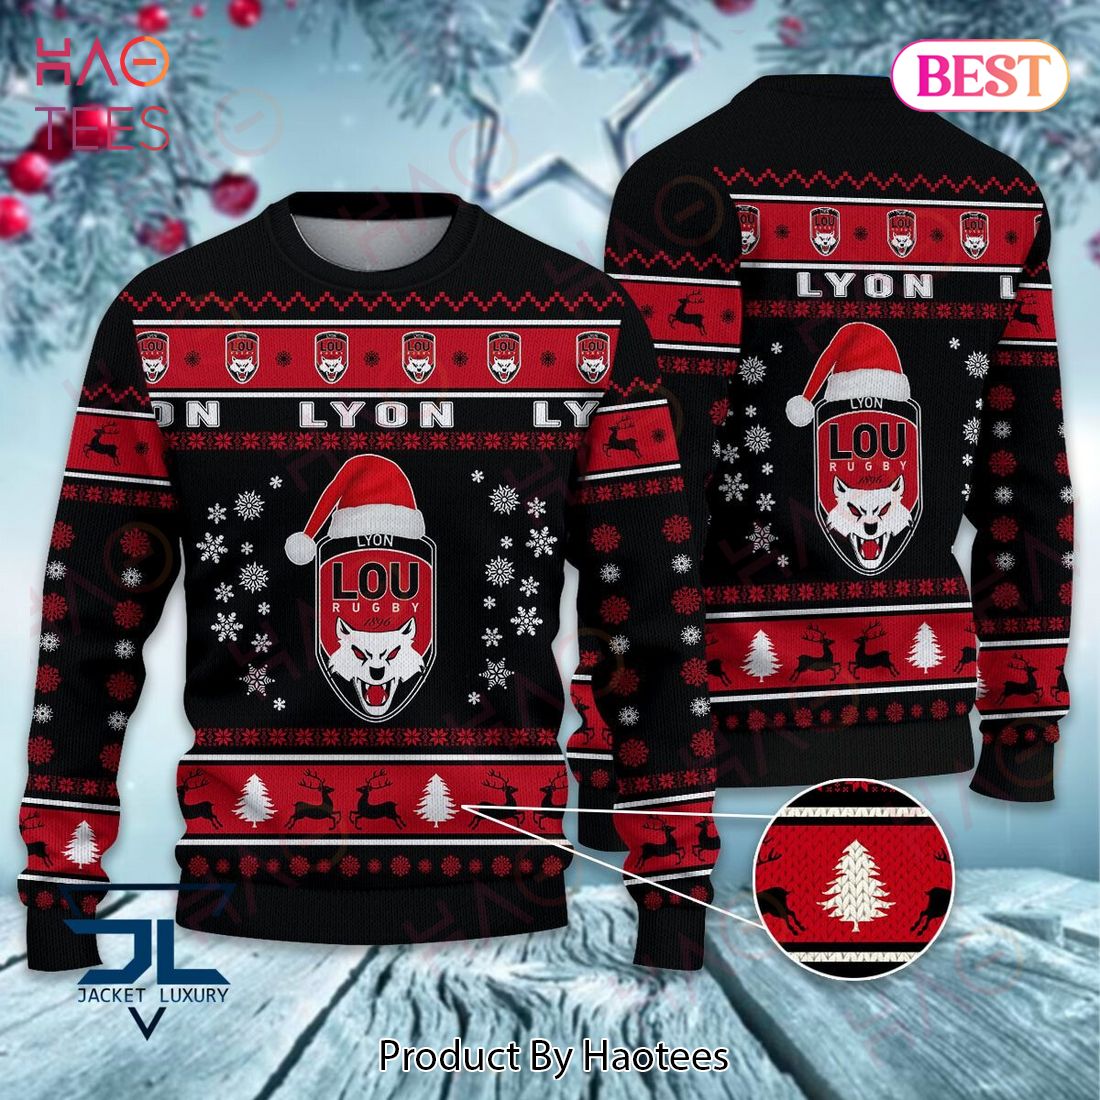 NEW Lyon Rugby Luxury Brand Sweater Limited Edition